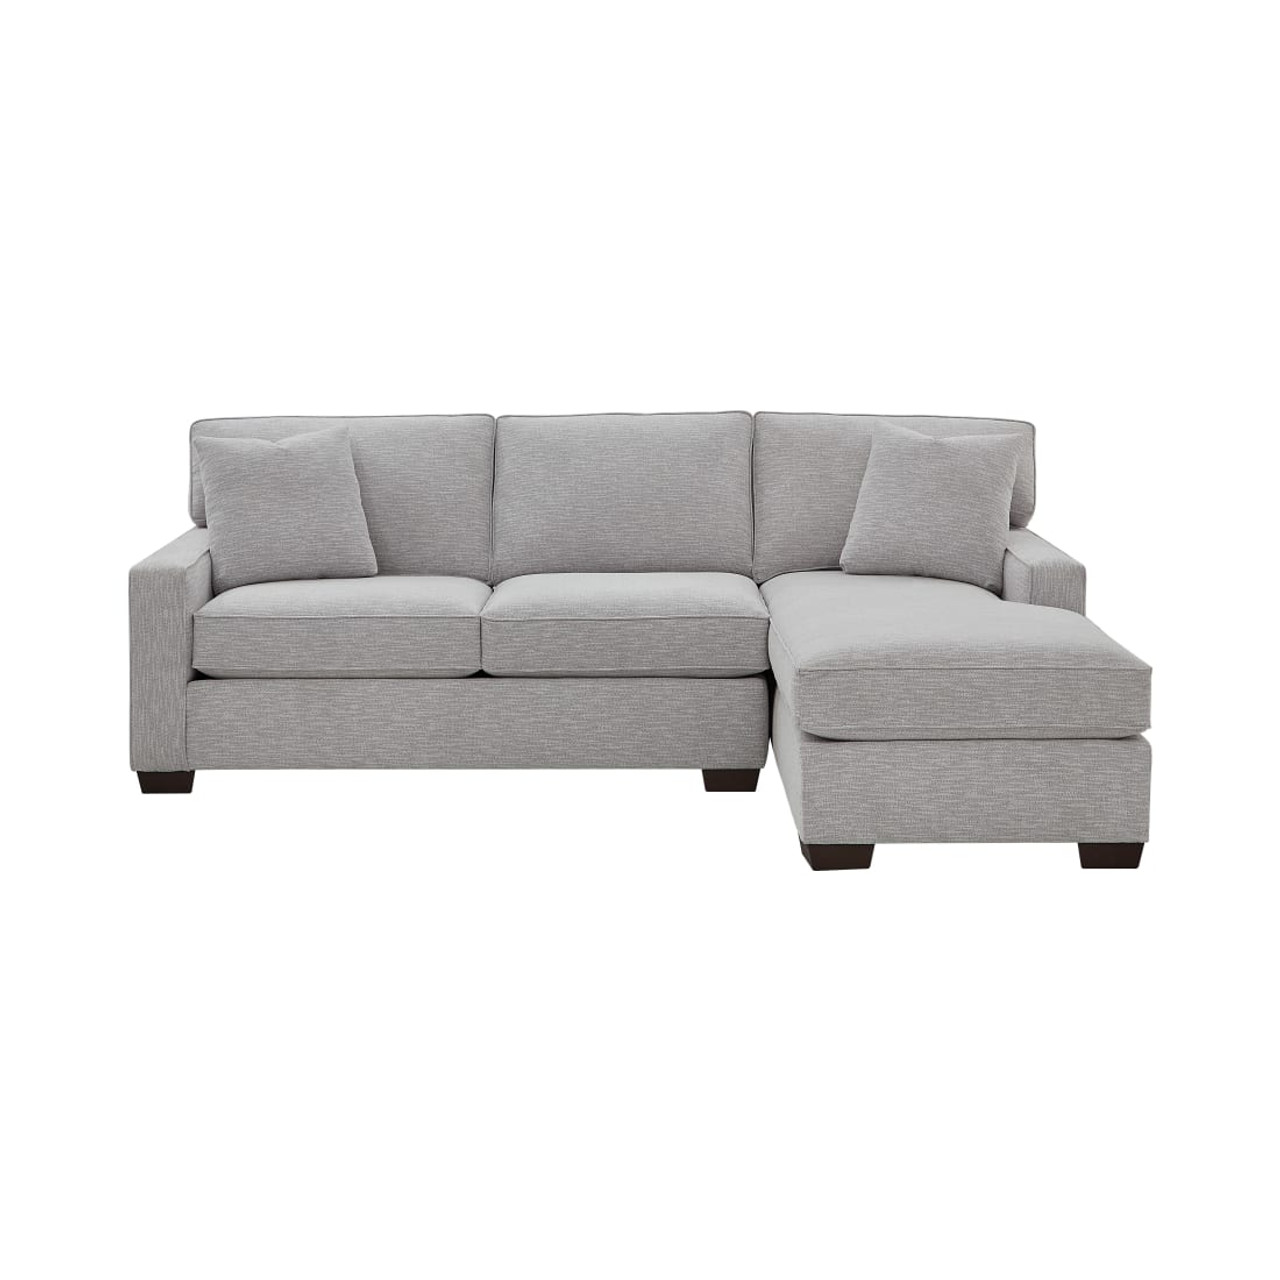 Crestview Track Arm Granite 2-pc sectional w/ right chaise